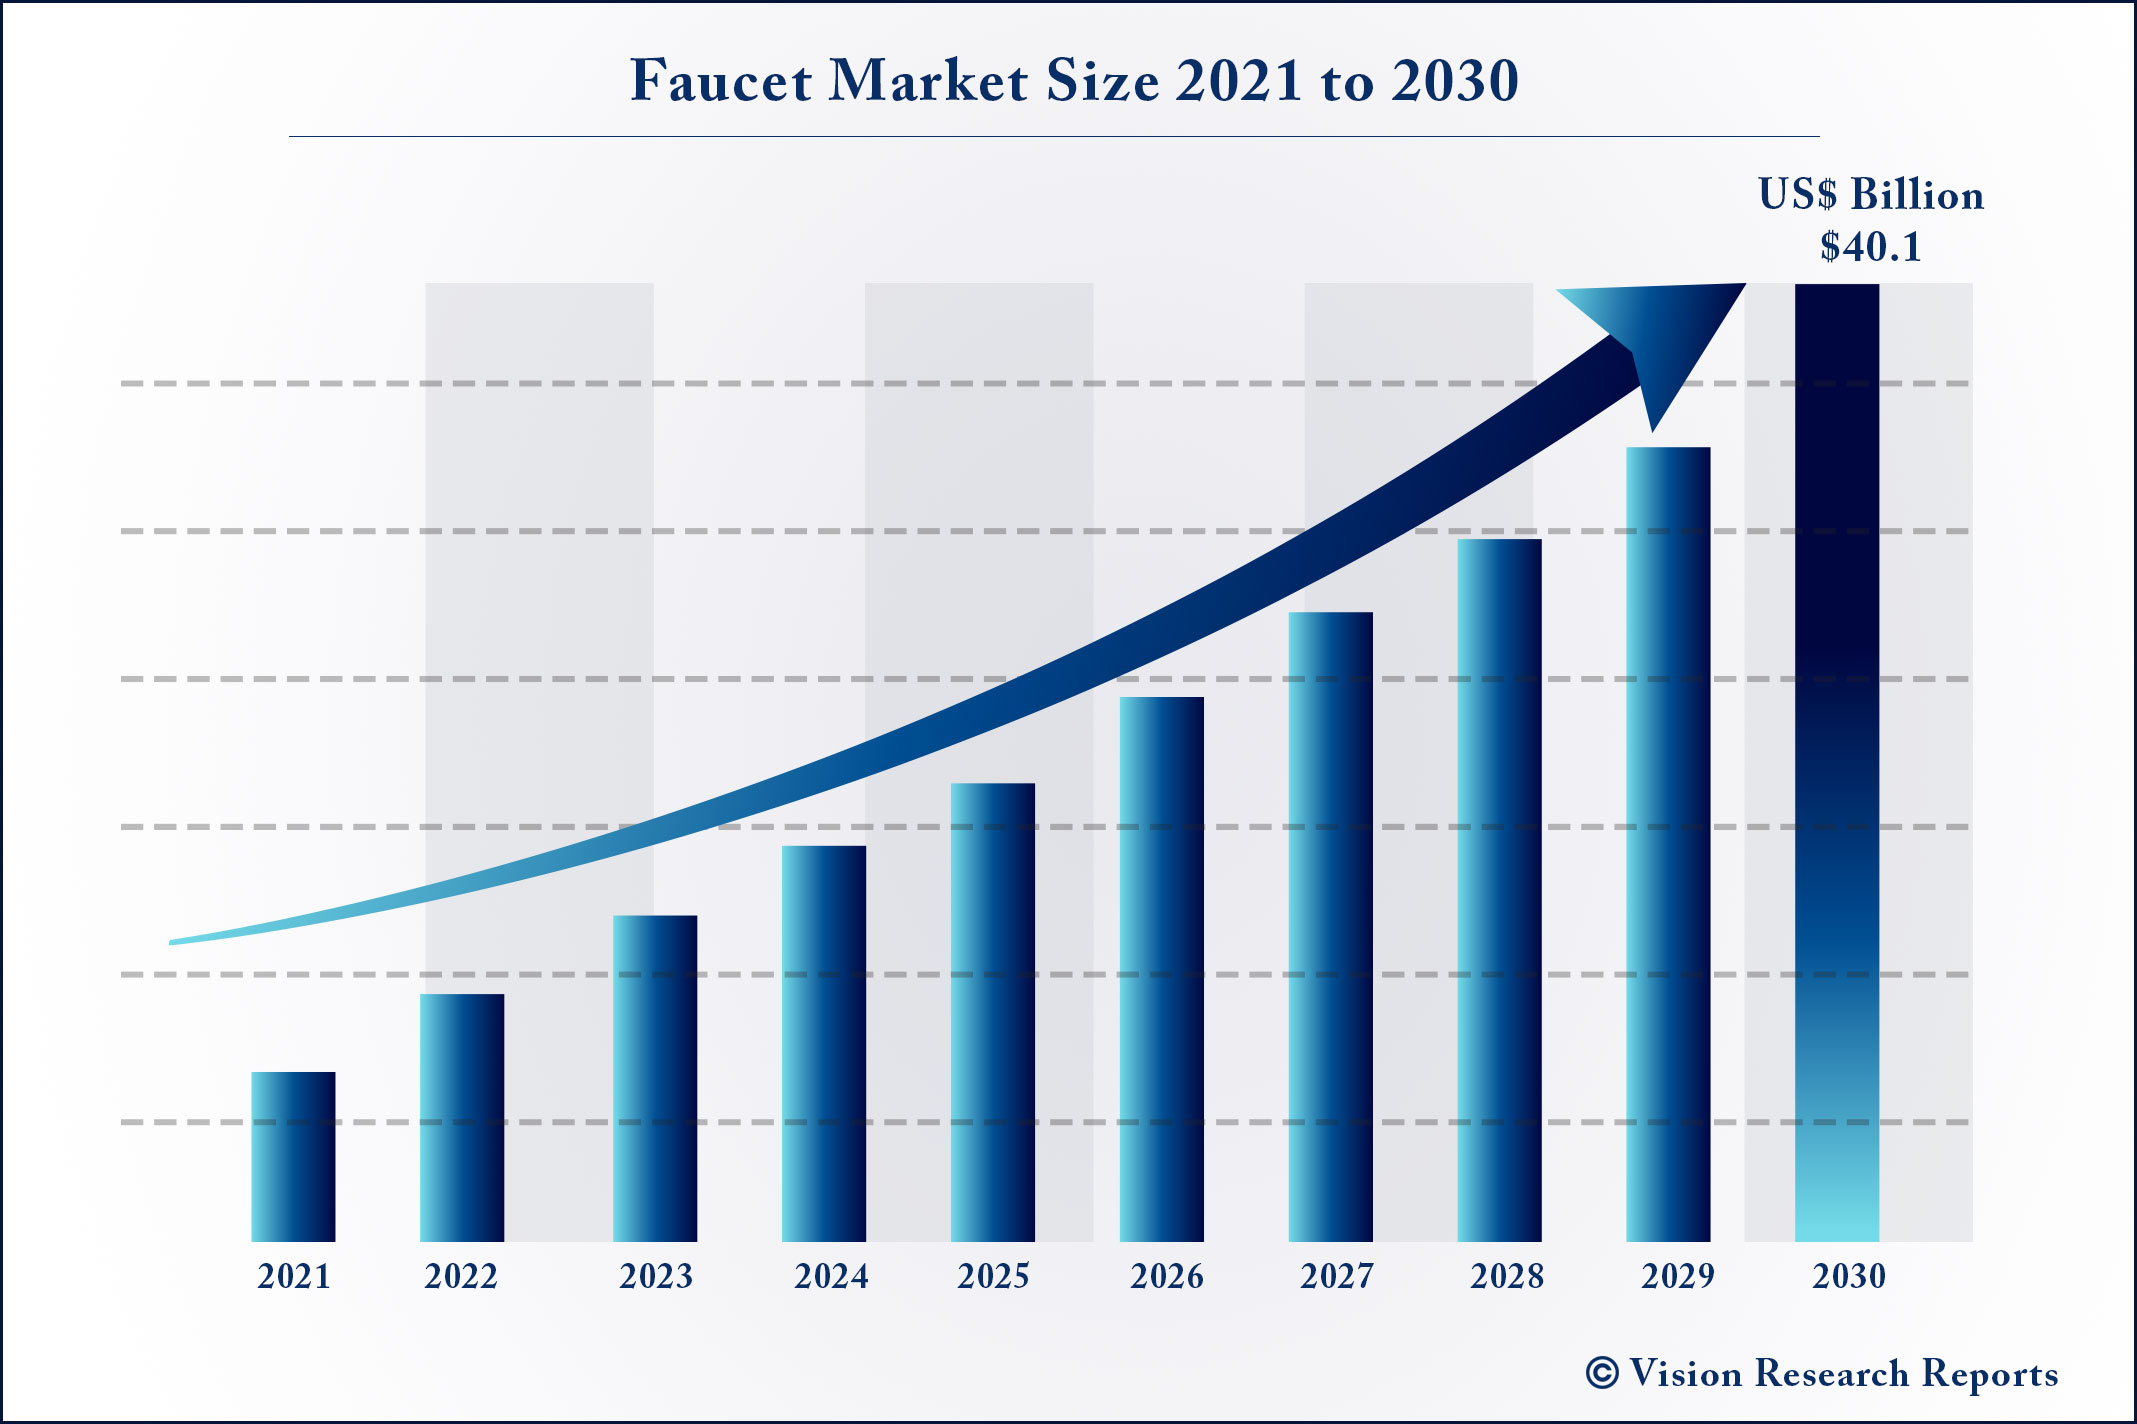 Faucet Market Size 2021 to 2030